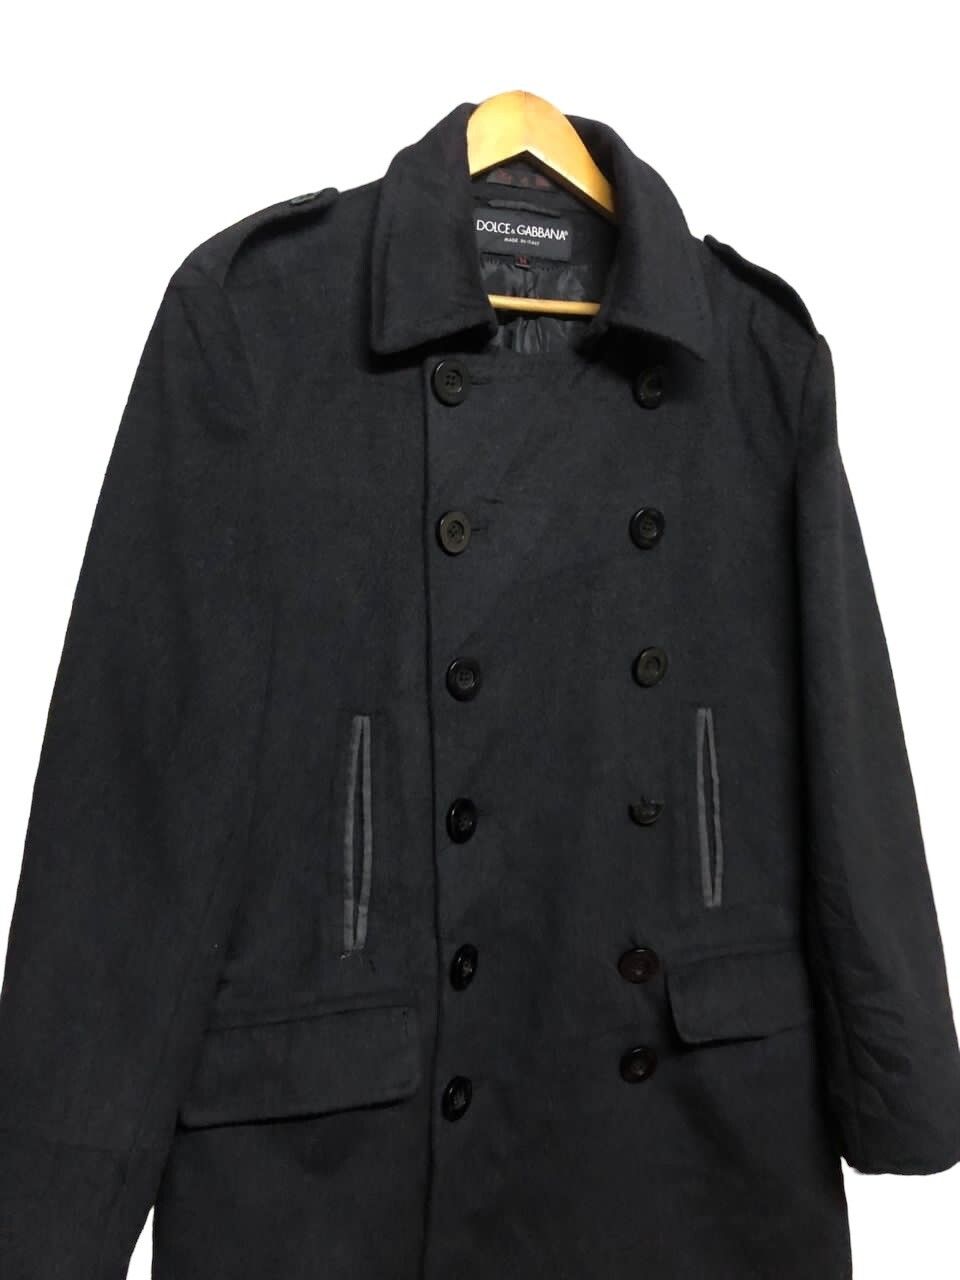 Dolce & Gabbana Wool Blend Double Breasted Overcoat - 4